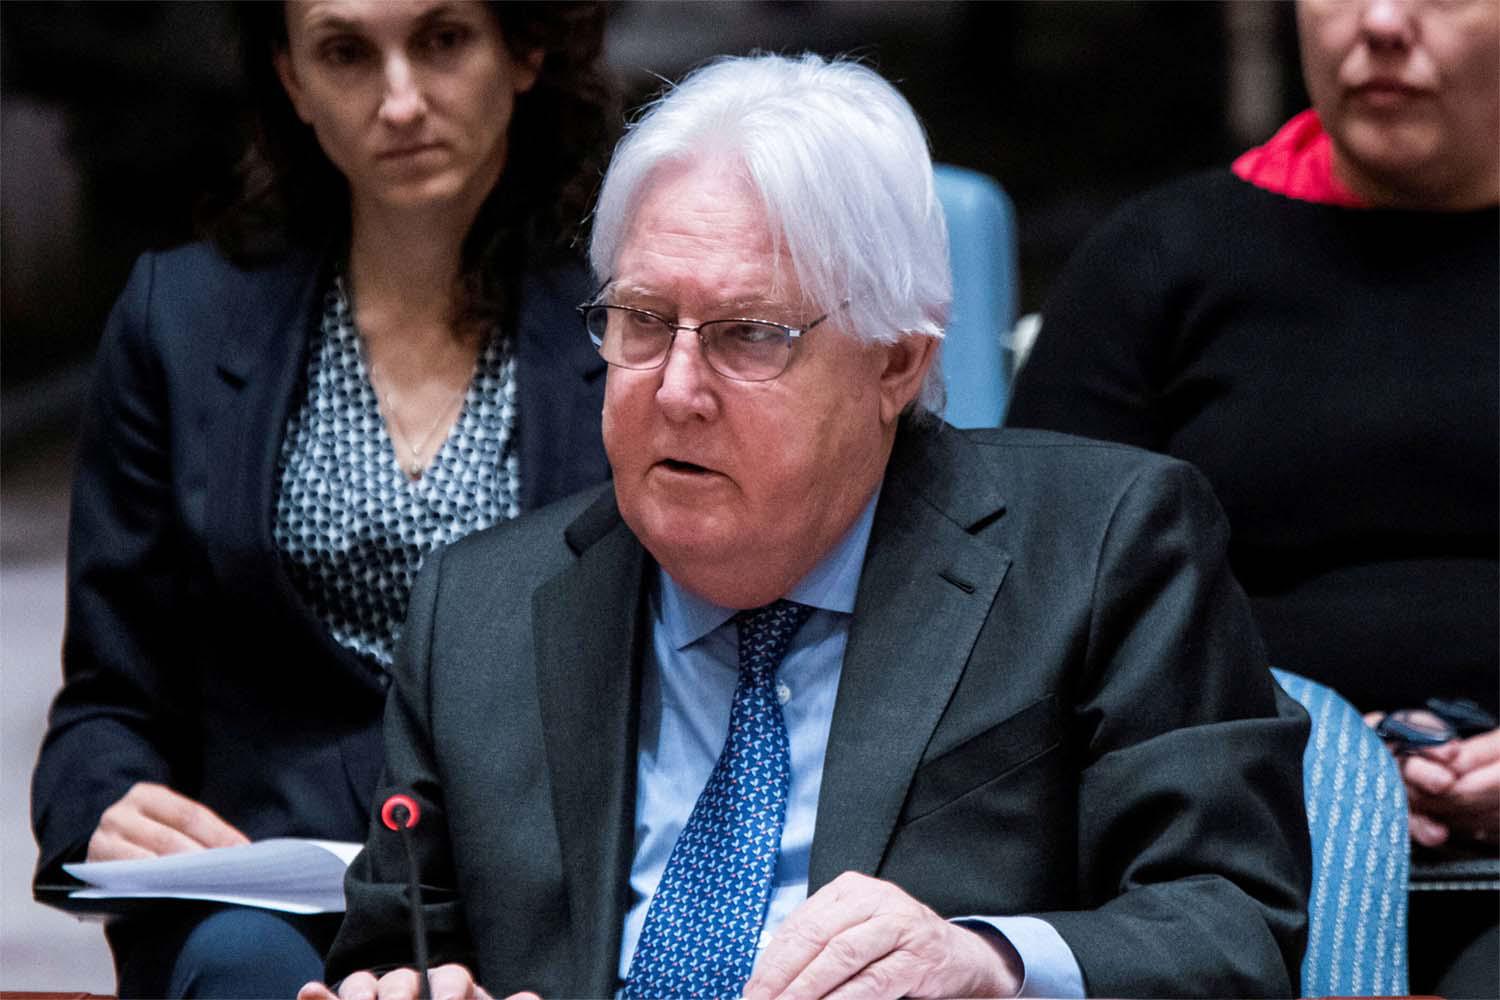 Martin Griffiths, the Under-Secretary-General for Humanitarian Affairs and Emergency Relief Coordinator